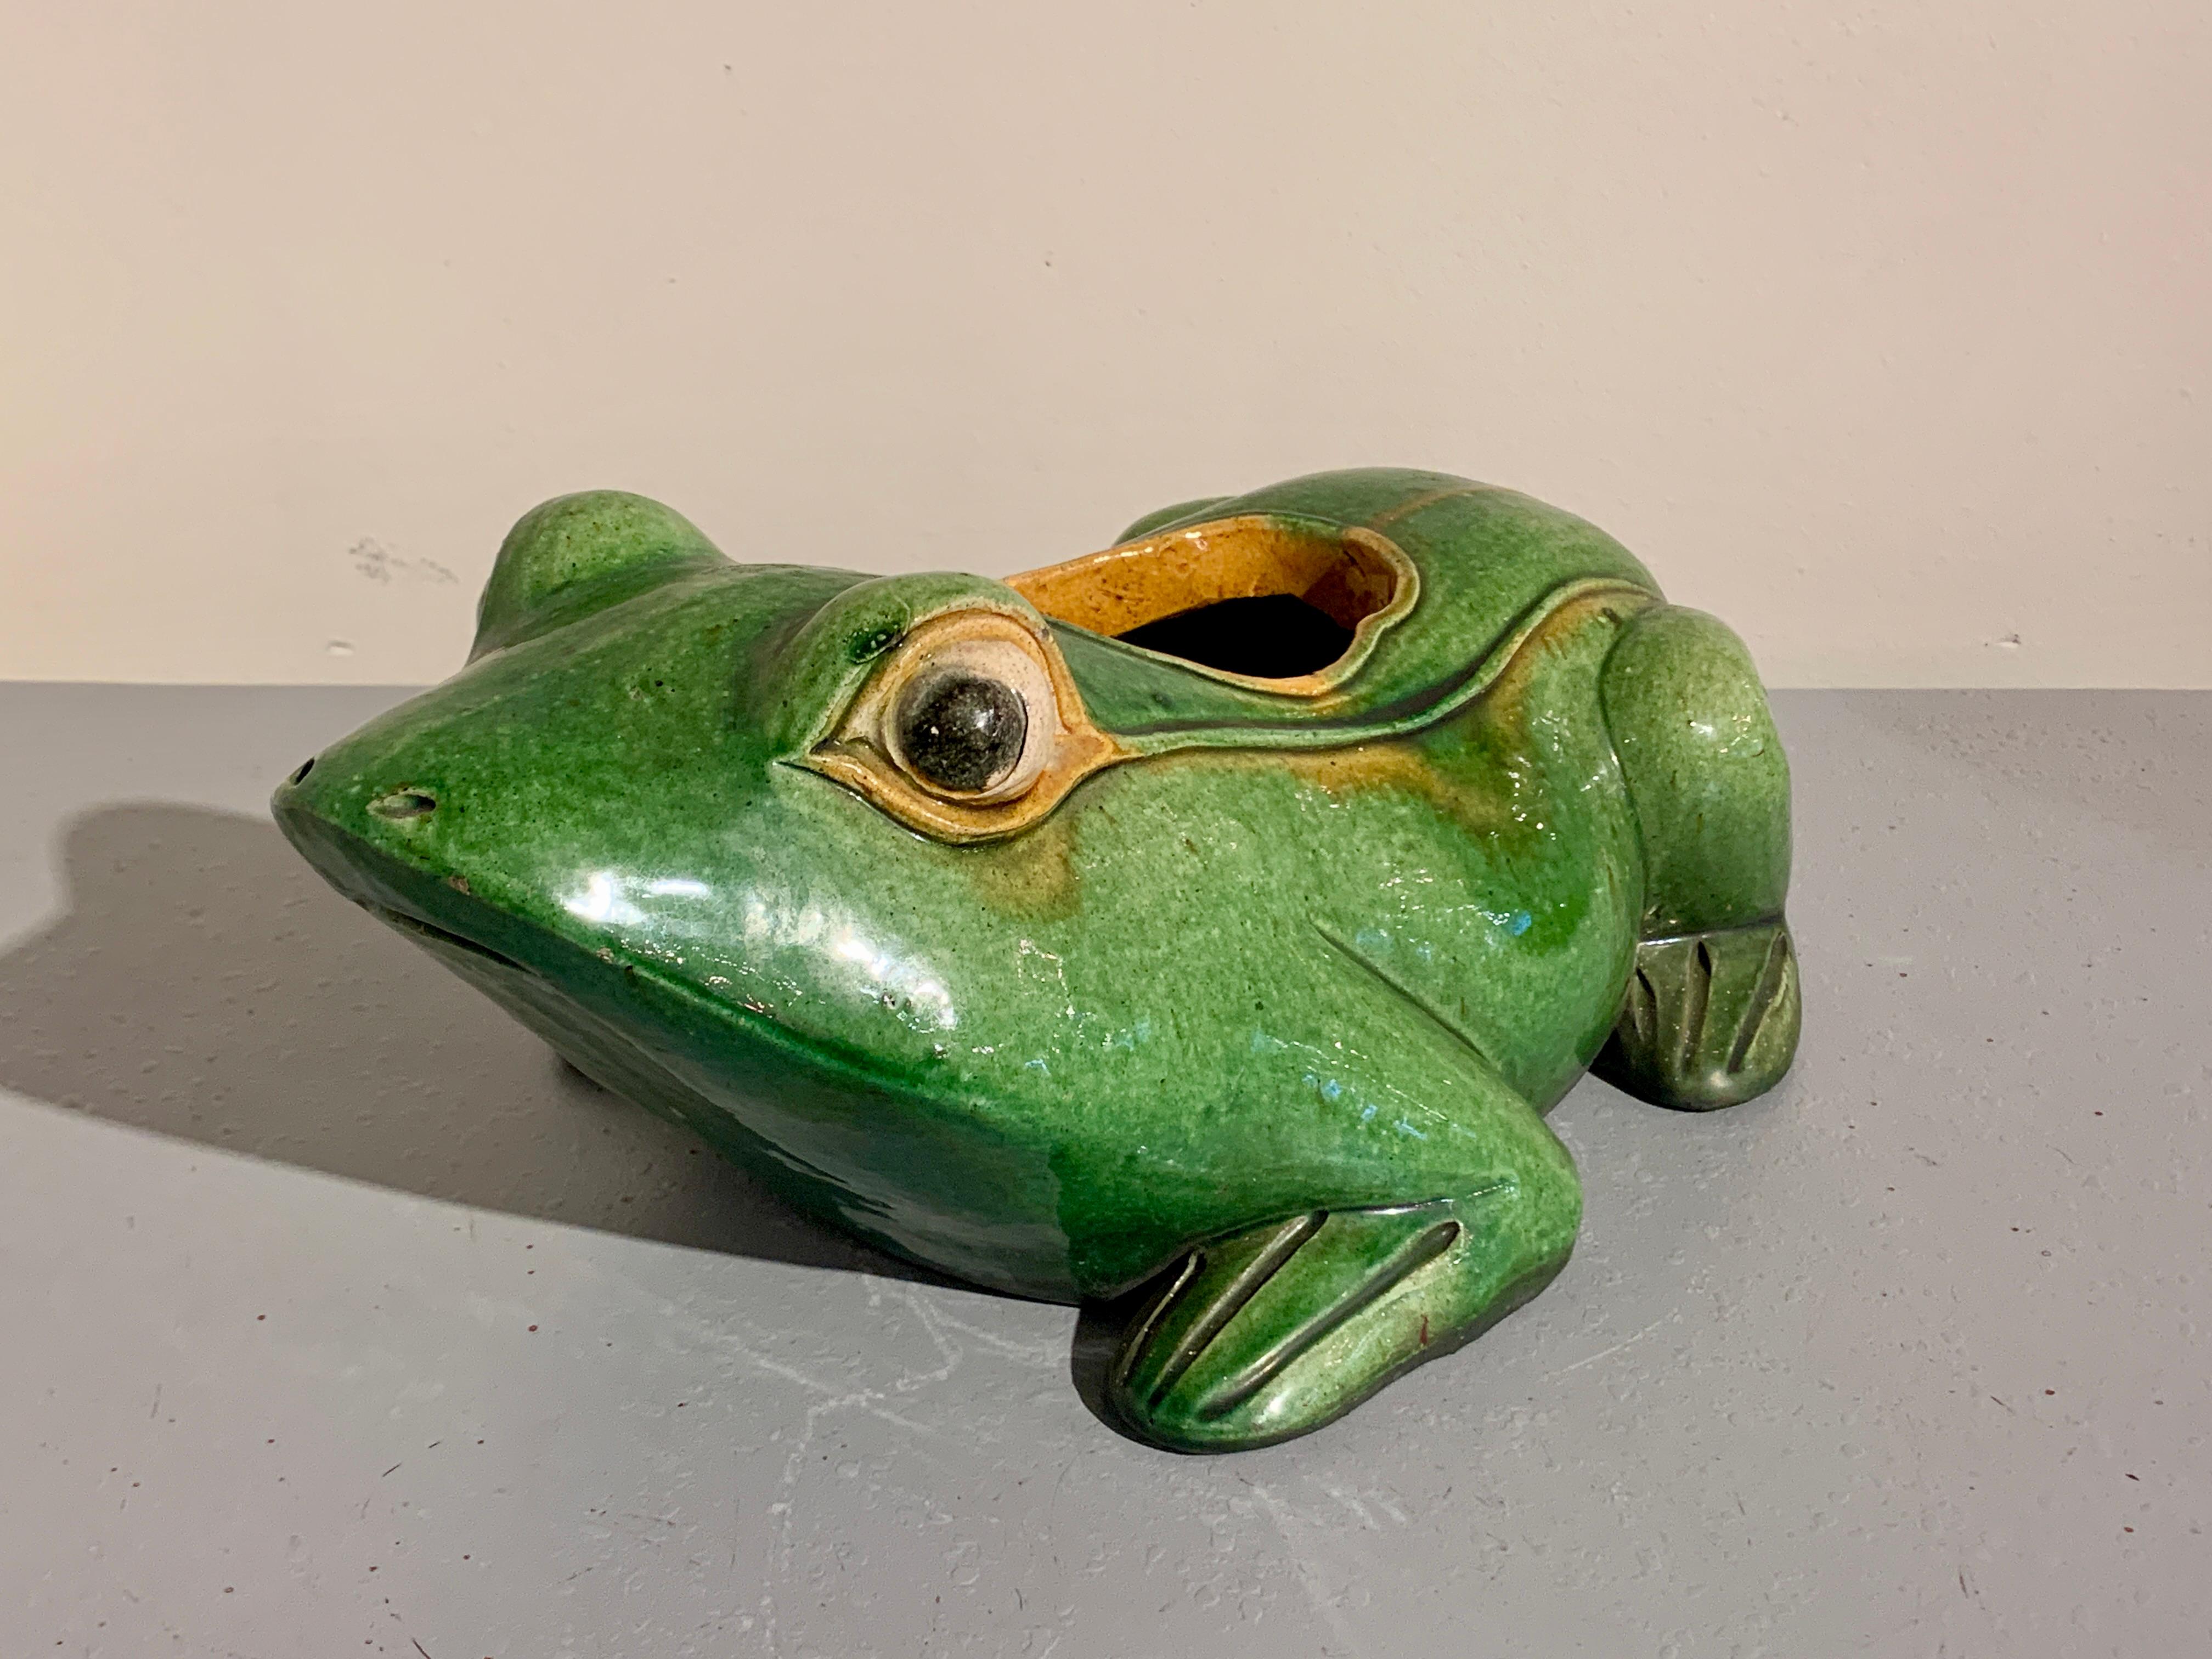 A delightful stoneware planter in the form of a frog, green glazed with mustard yellow highlights, mid 20th century. 

The planter is shaped like a crouching frog, looking slightly upwards with bulging eyes, a curious expression on its face. The